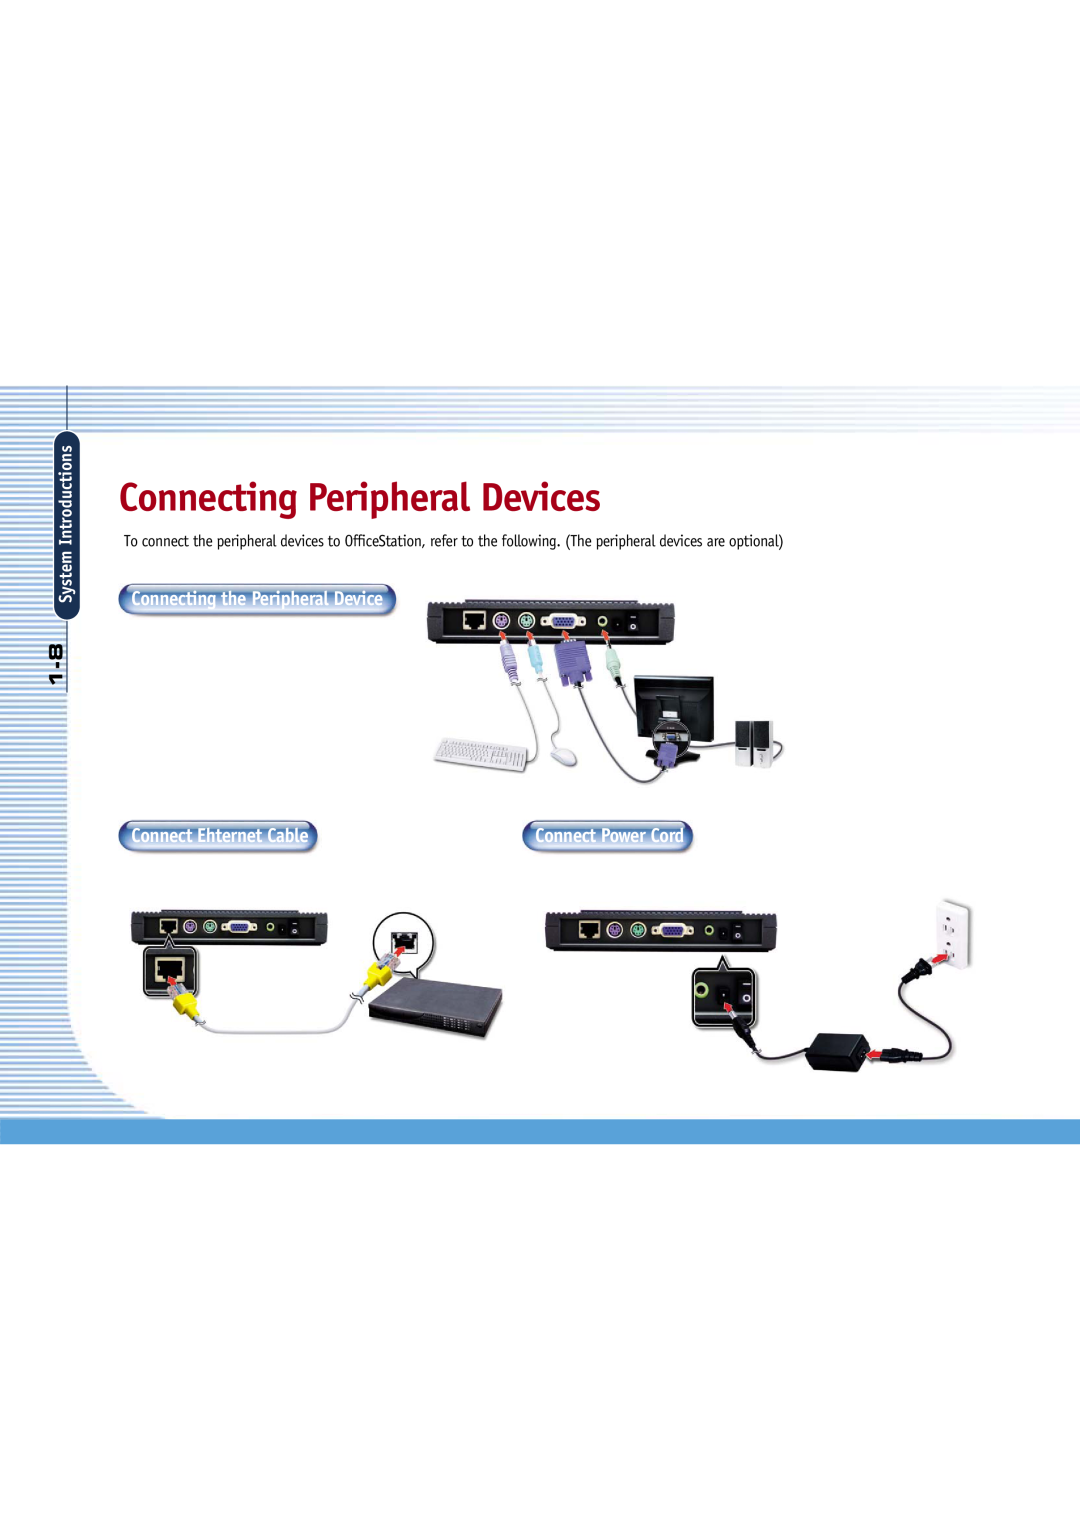 Gateway L110 Connecting Peripheral Devices, Connecting the Peripheral Device, Connect Ehternet Cable, System Introductions 